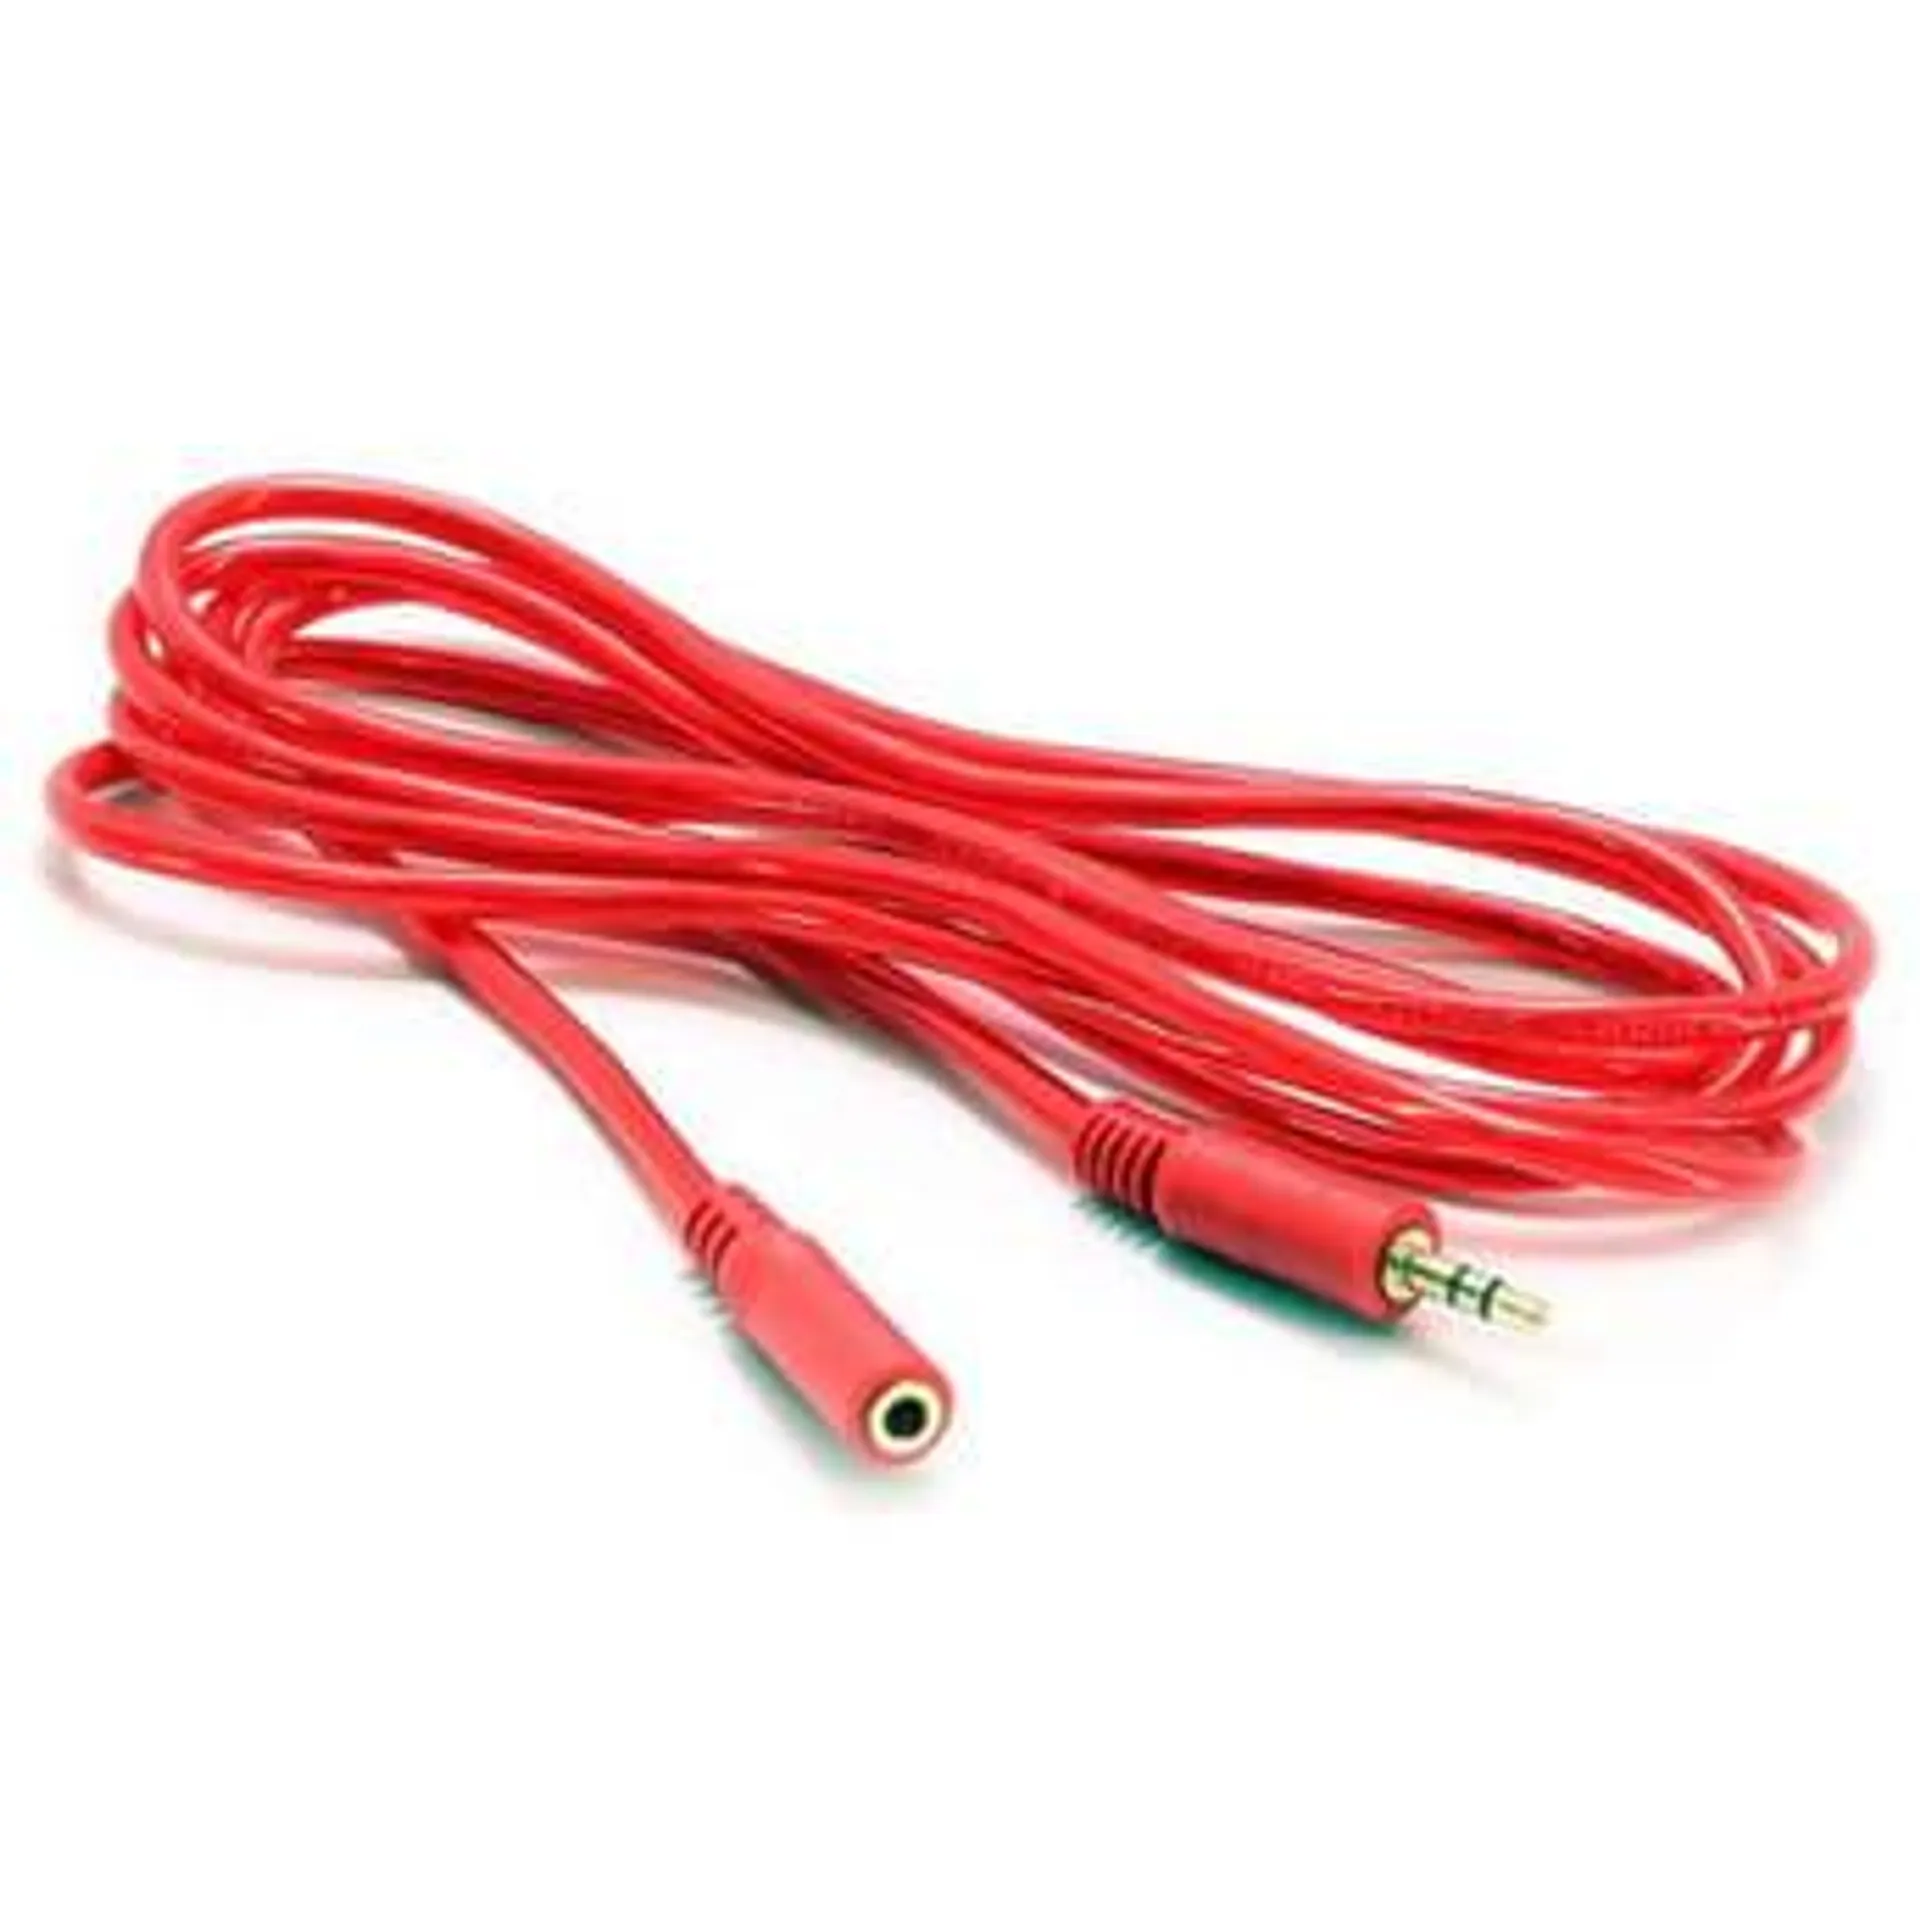 Cyberdyne 3.5mm Stereo Female to Stereo Male Cable (5m)